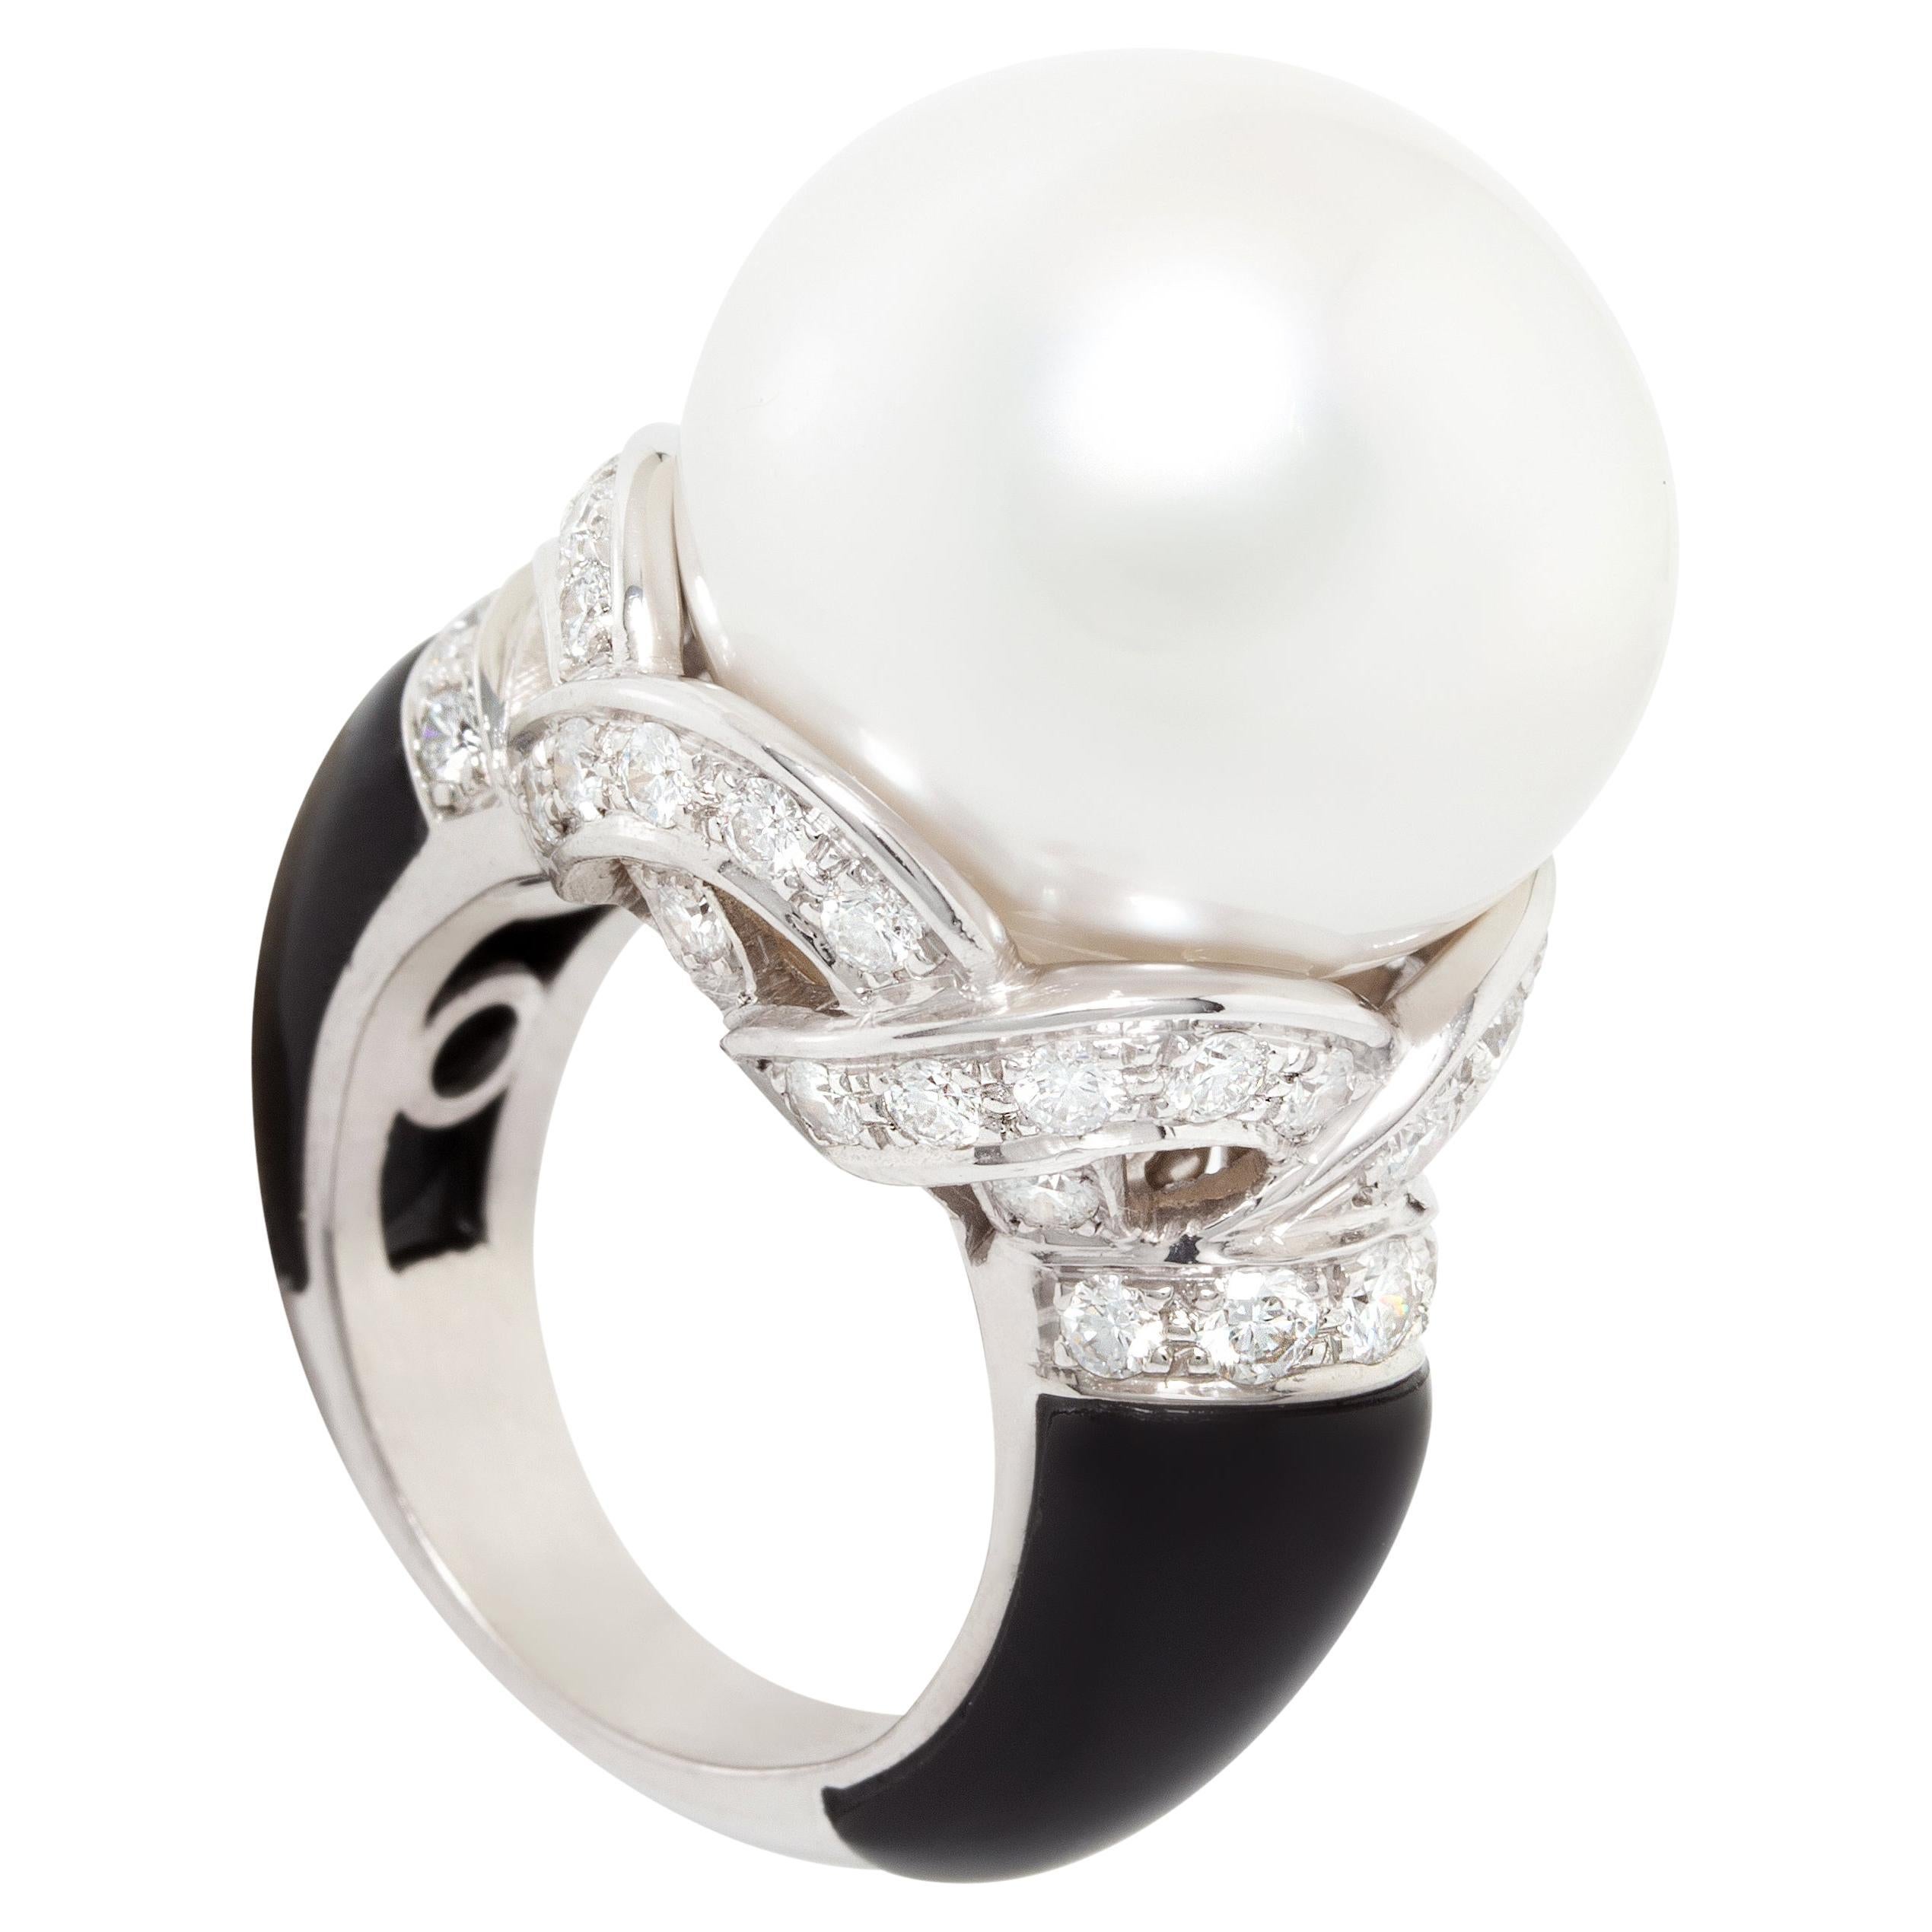 Ella Gafter 19.5mm South Sea Pearl Diamond Ring For Sale